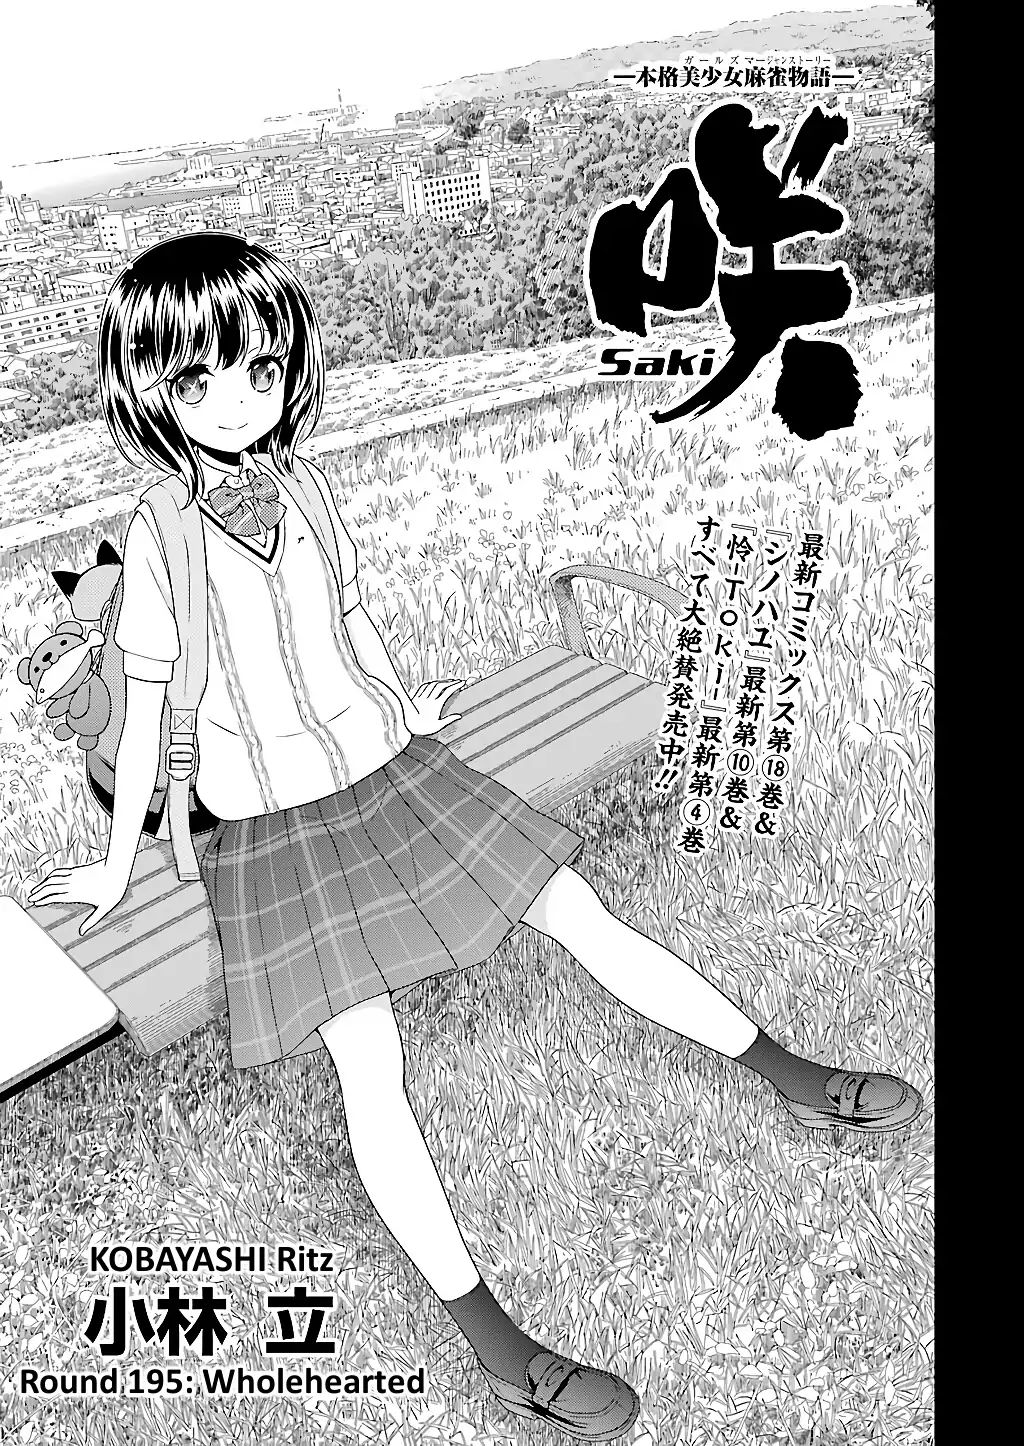 Saki Chapter 195: Wholehearted - Picture 1